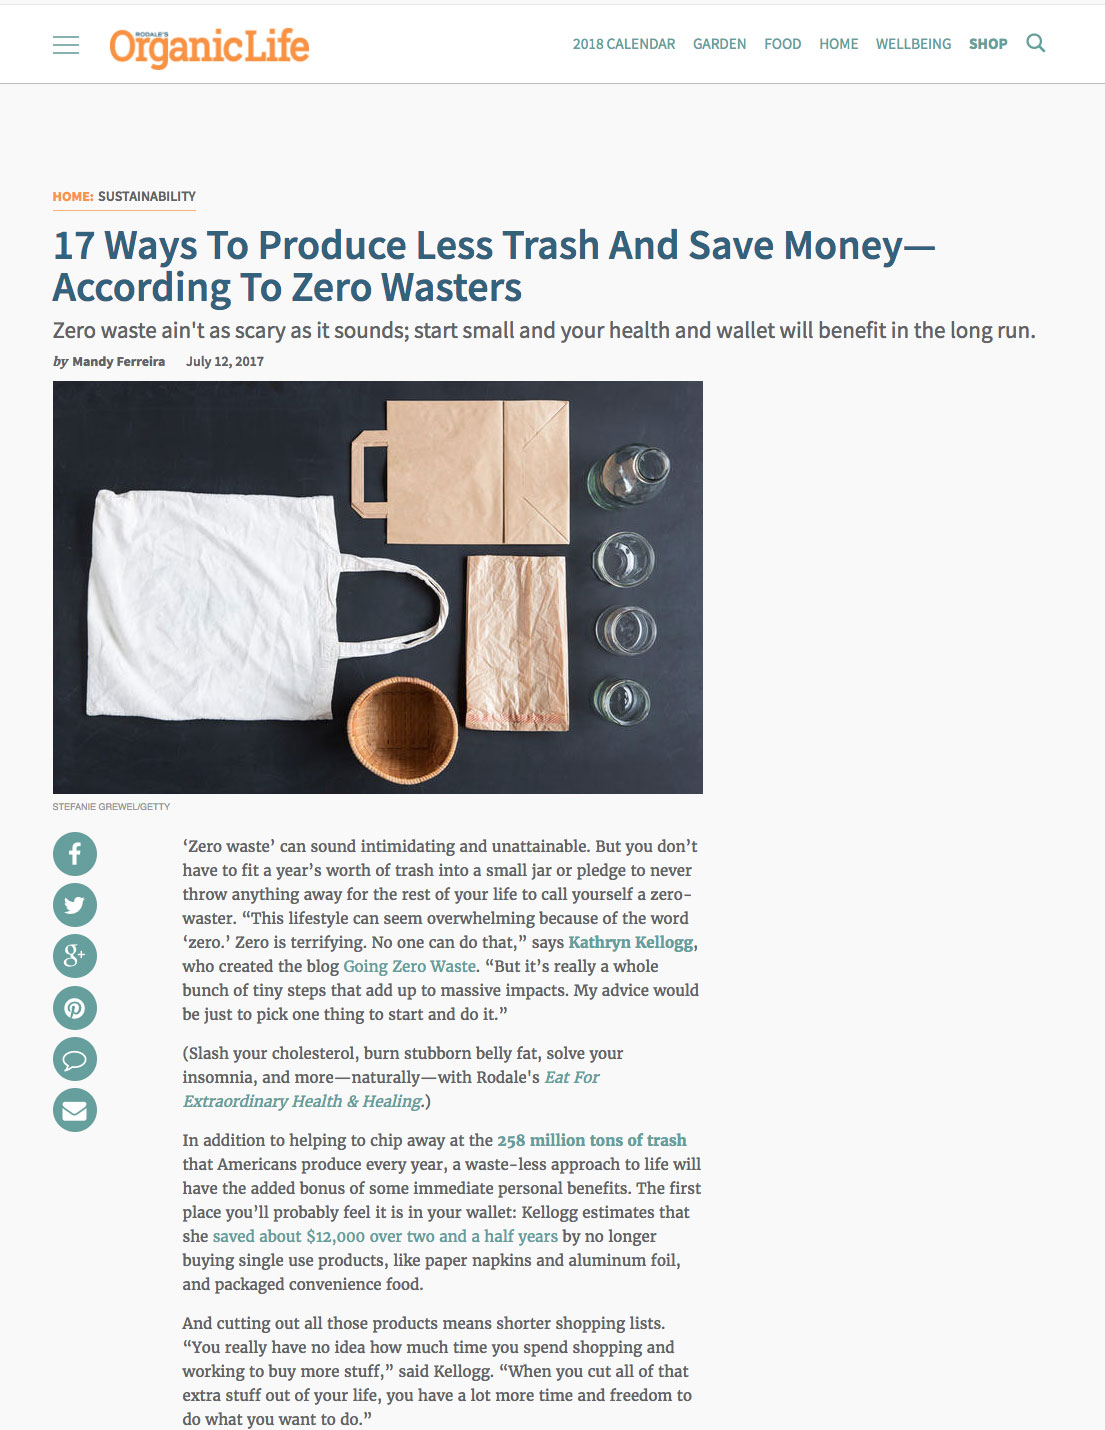 17 Ways To Produce Less Trash And Save Money—According To Zero Wasters by Mandy Ferreira Rodale's Organic Life